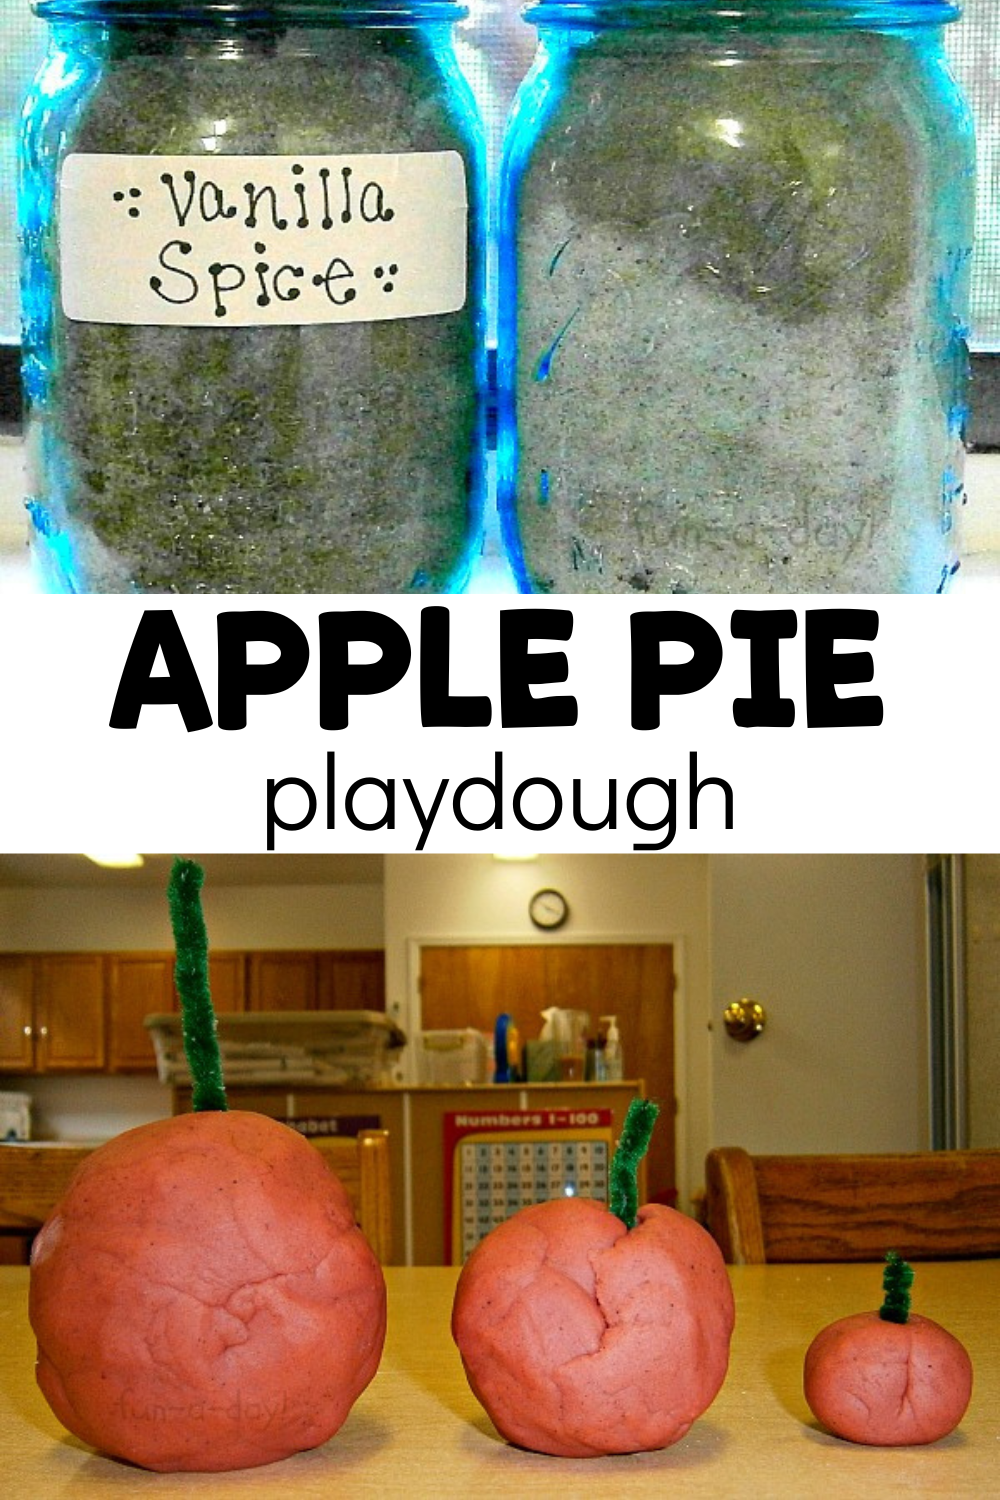 jar of vanilla spice mix and play dough apples with text that reads apple pie playdough